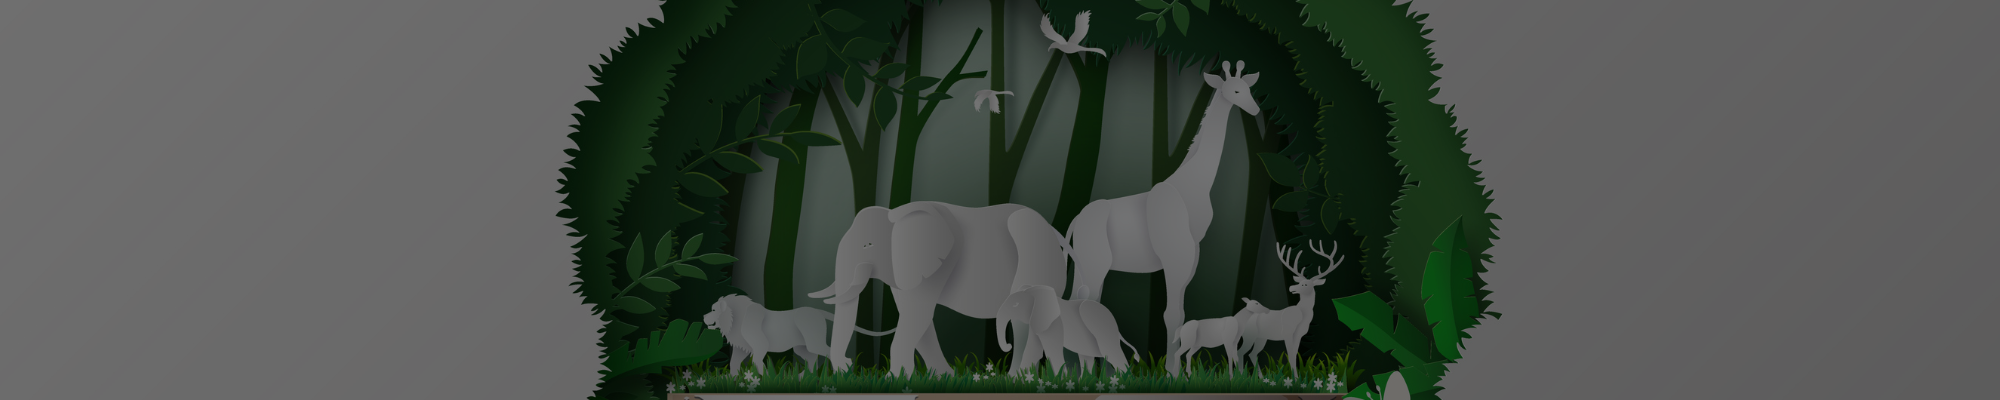 Paper cutouts of various types of animals.